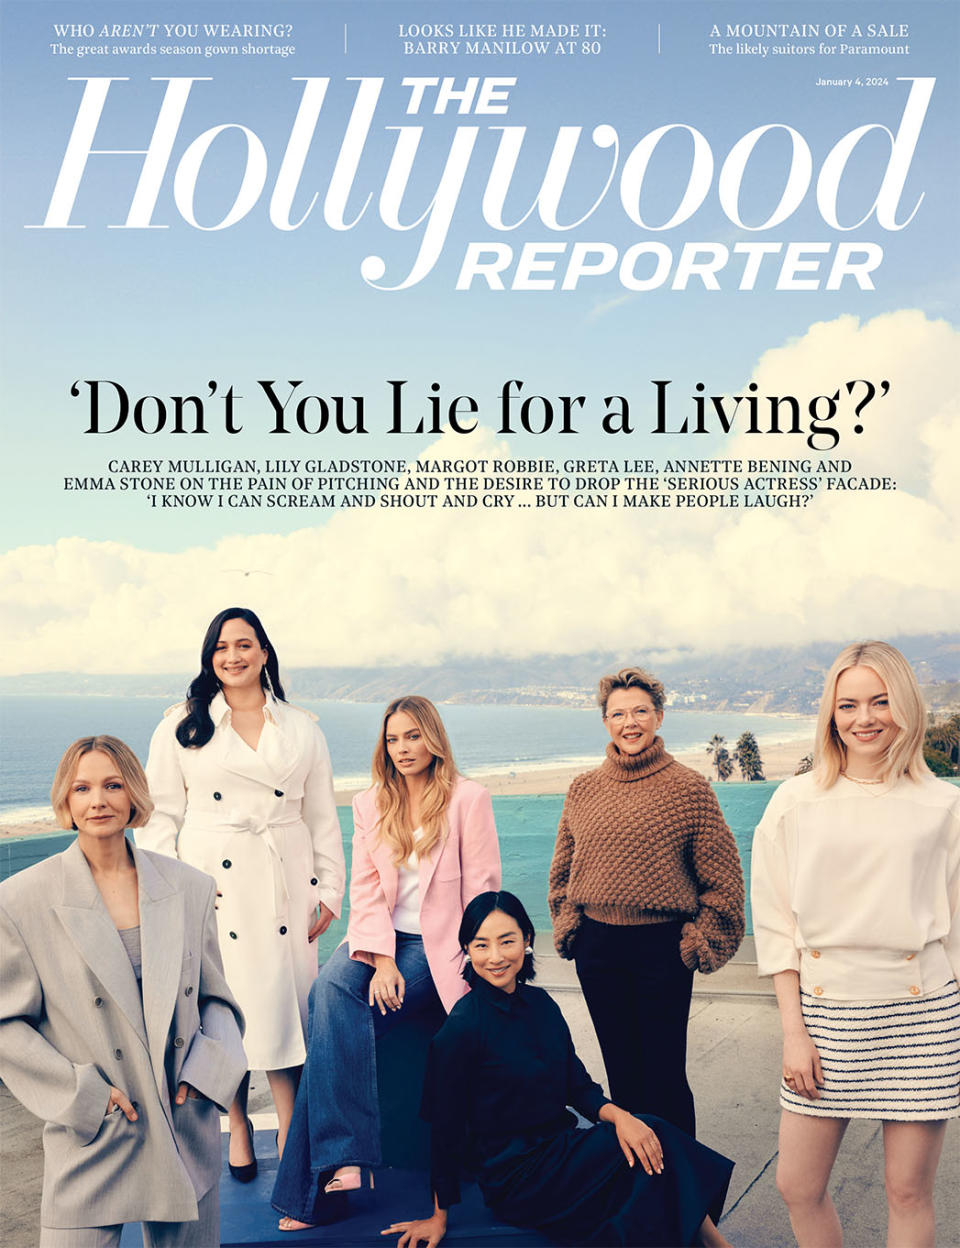 Clockwise from left: Carey Mulligan, Lily Gladstone, Margot Robbie, Annette Bening, Emma Stone and Greta Lee were photographed Nov. 18 at The Georgian Hotel in Santa Monica.